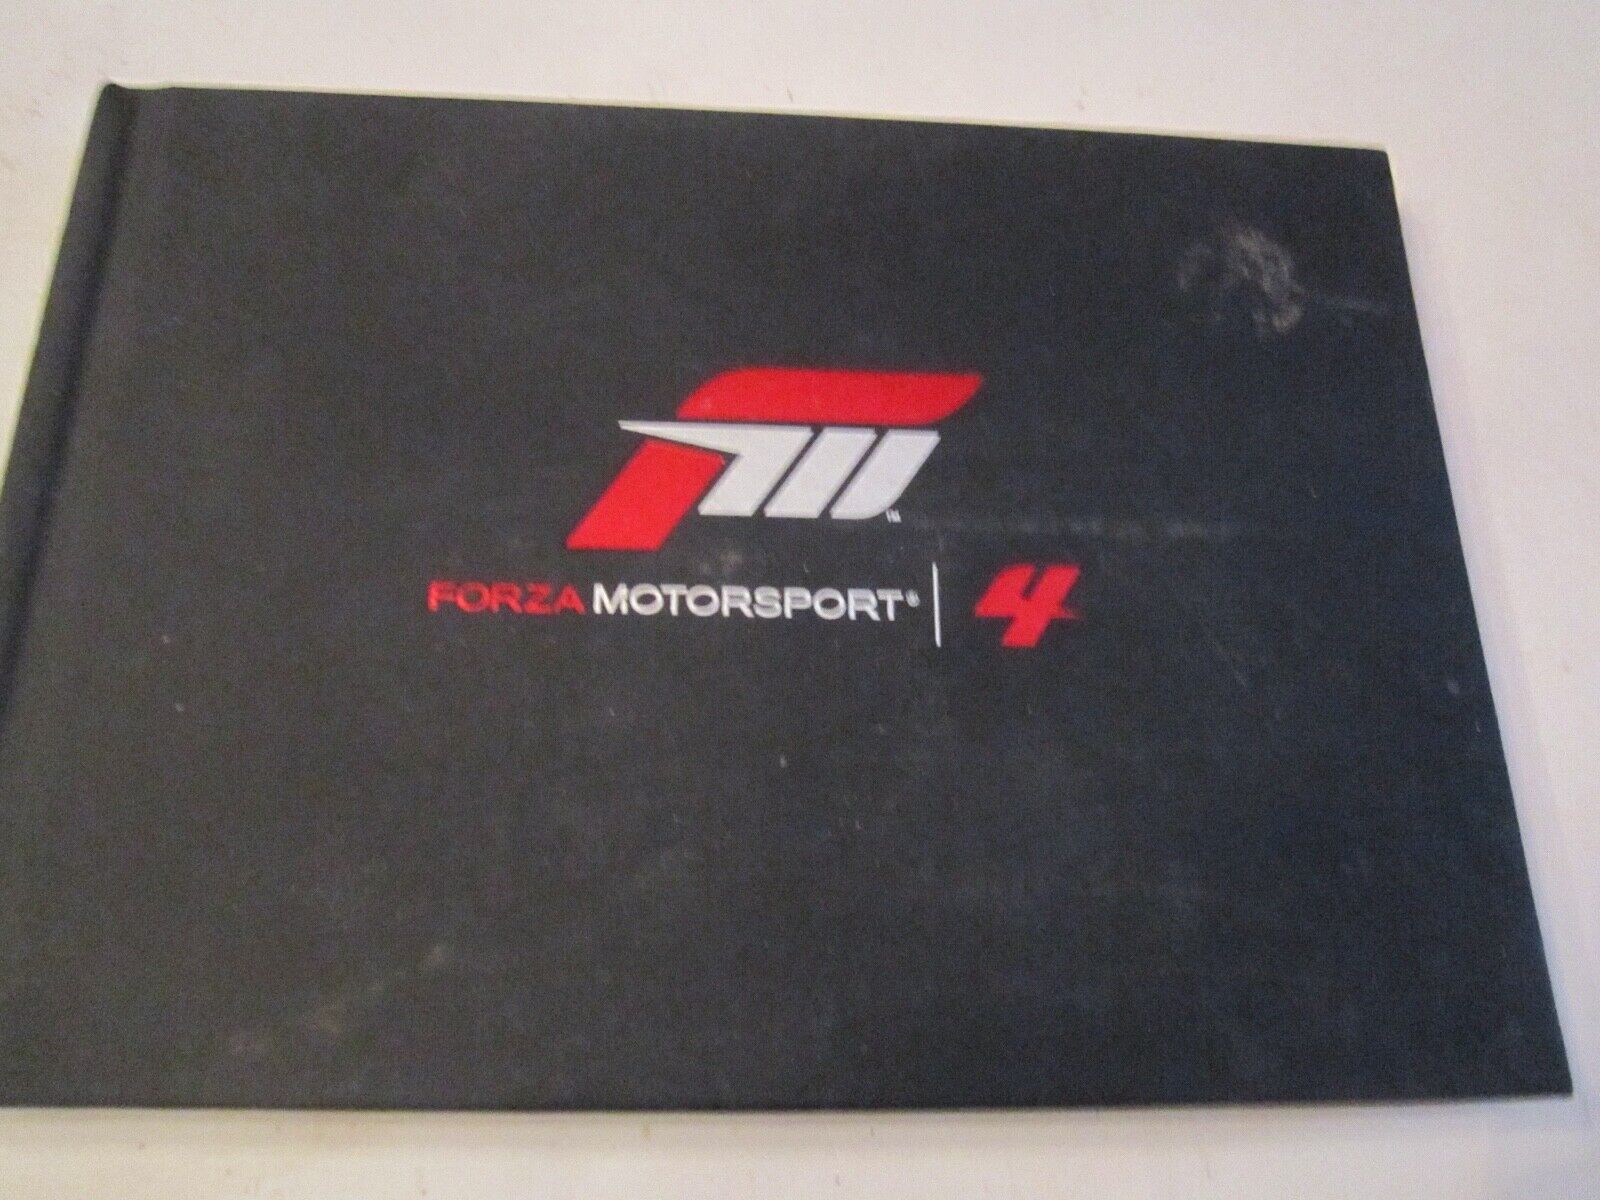 TOP GEAR FORZA MOTORSPORT 4 BOOKLET -FERRARI SUPERCARS & MORE - 96 PAGES - TUB M